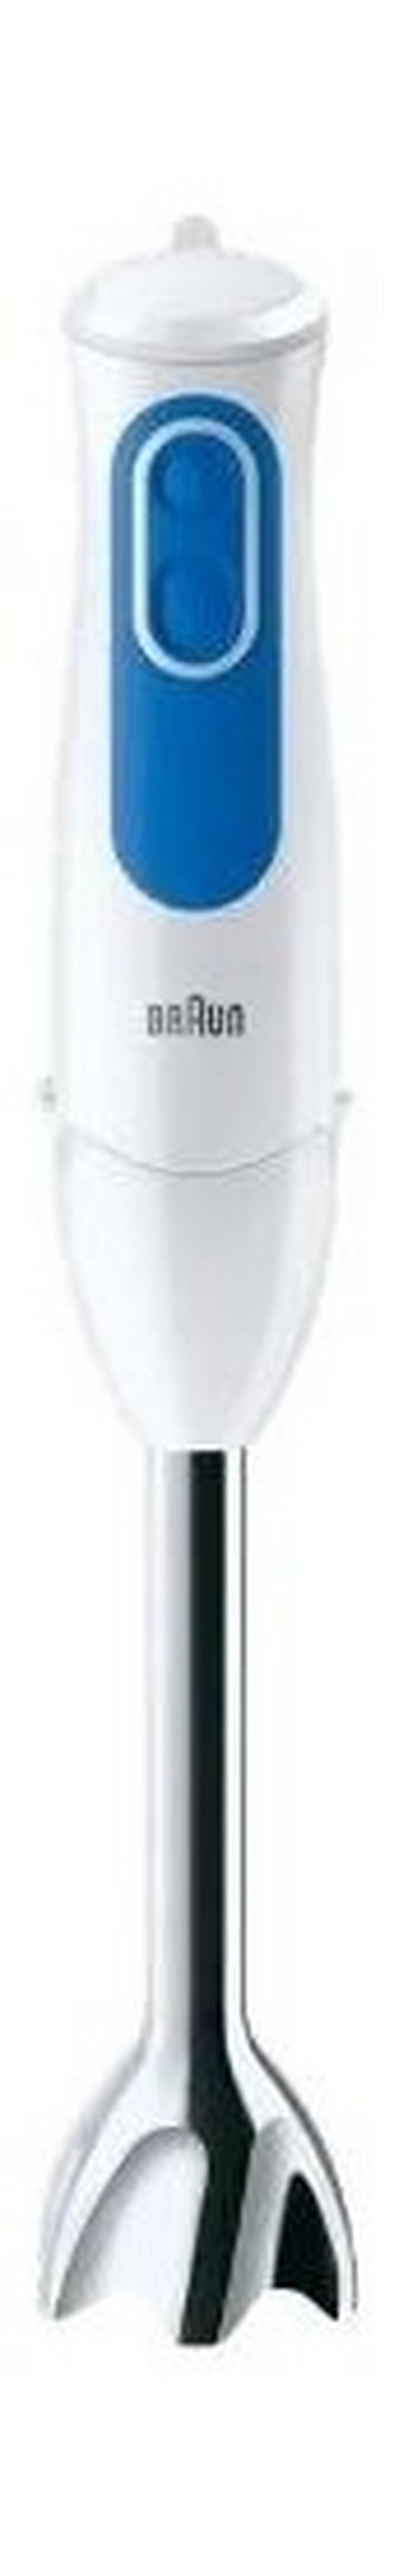 Braun Omlette MultiQuick 3 Hand Blender with Chopper and Whisk - 700W (MQ 3025)